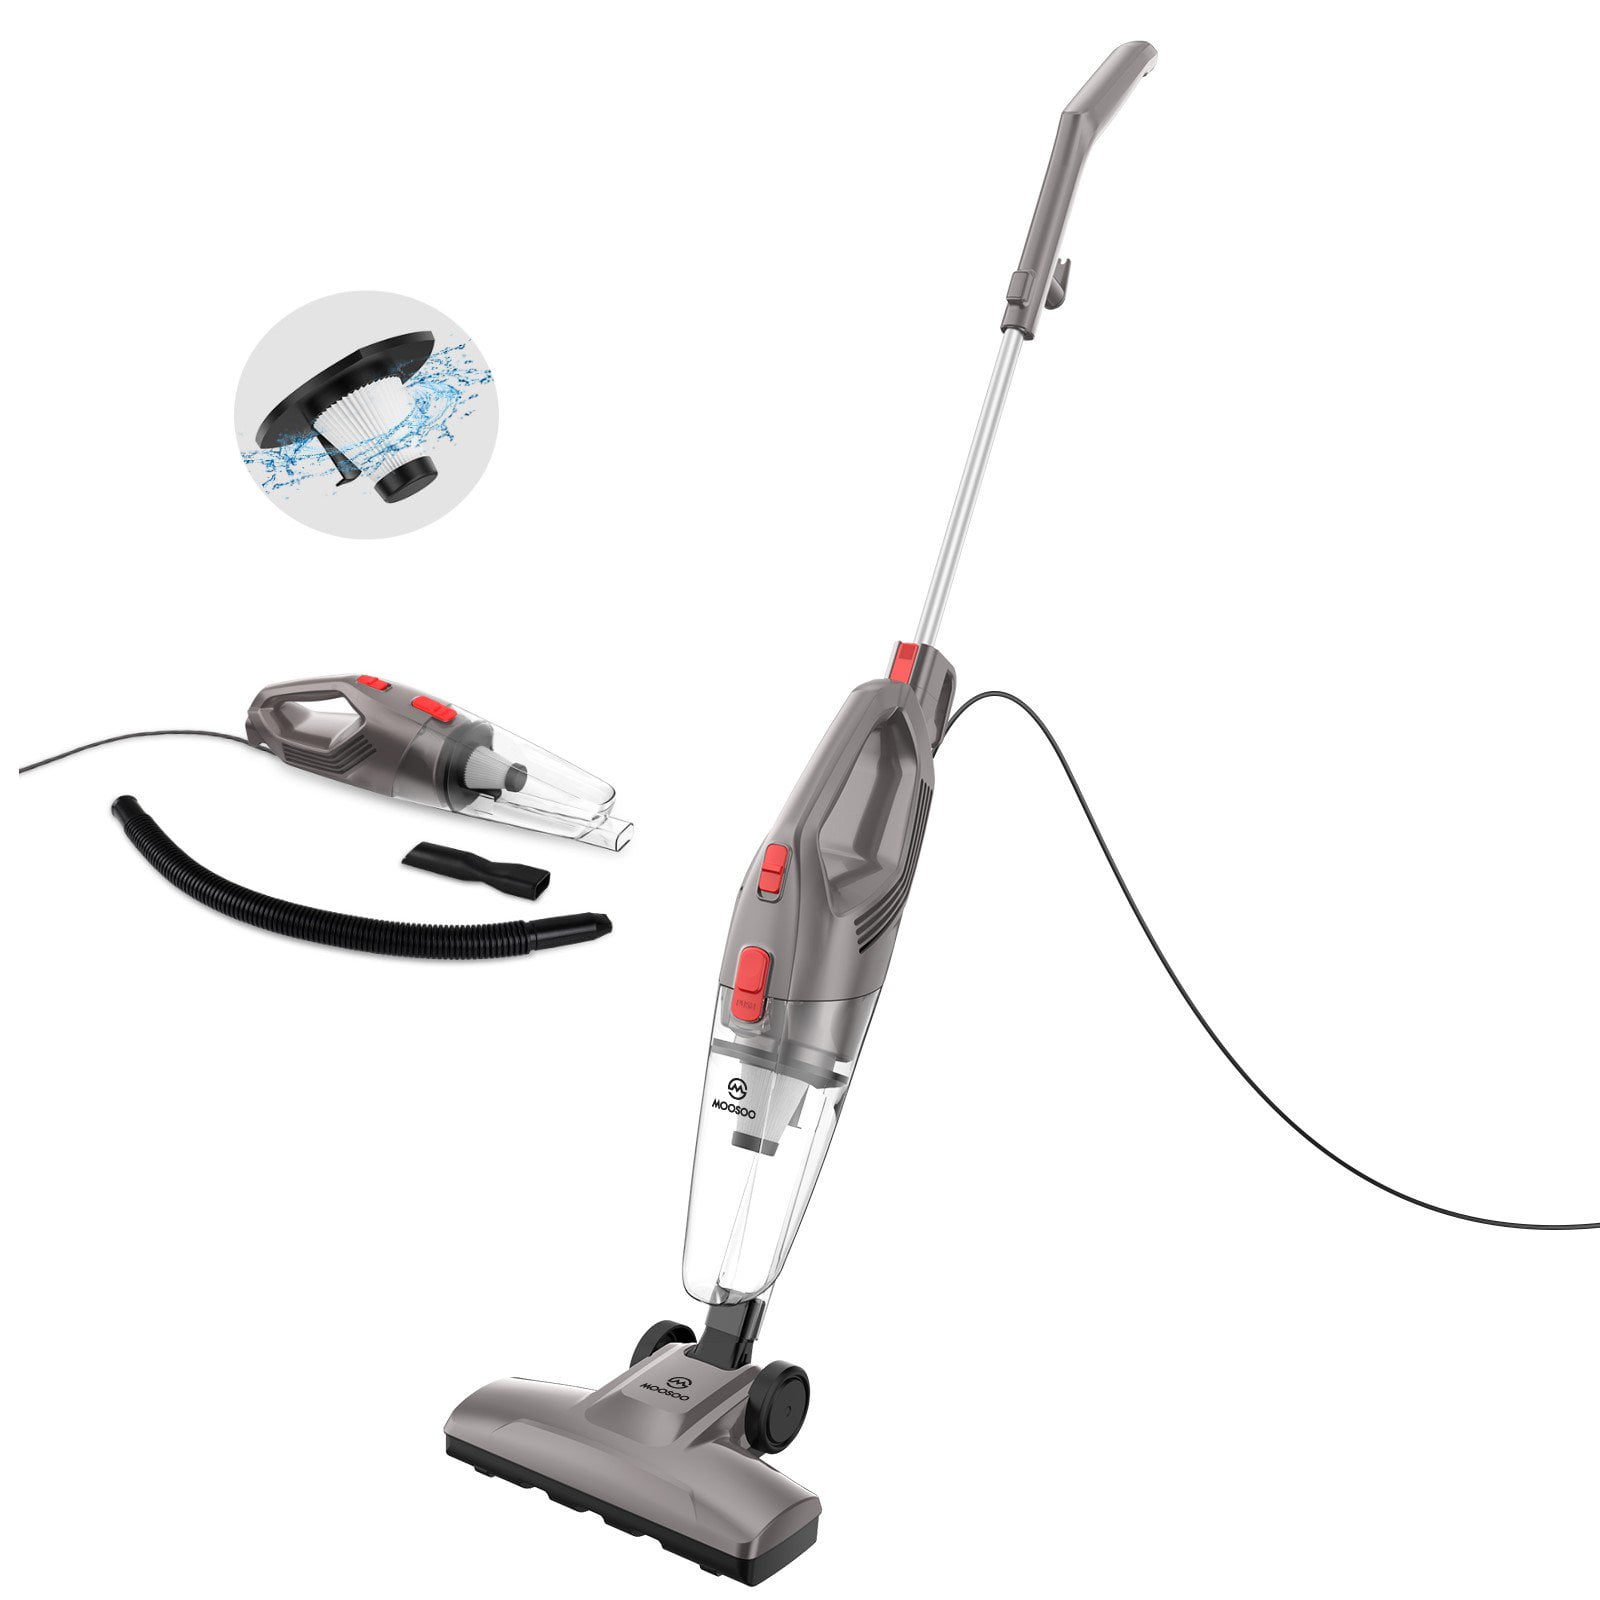 Hardwood Floor Vacuum with 450W Powerful Suction 4-in-1 Small Vacuum Cleaner with HEPA Filters Corded Stick Vacuum Perfect for Hard Floor Pet Hair Home Apartments Dorms Small Spaces